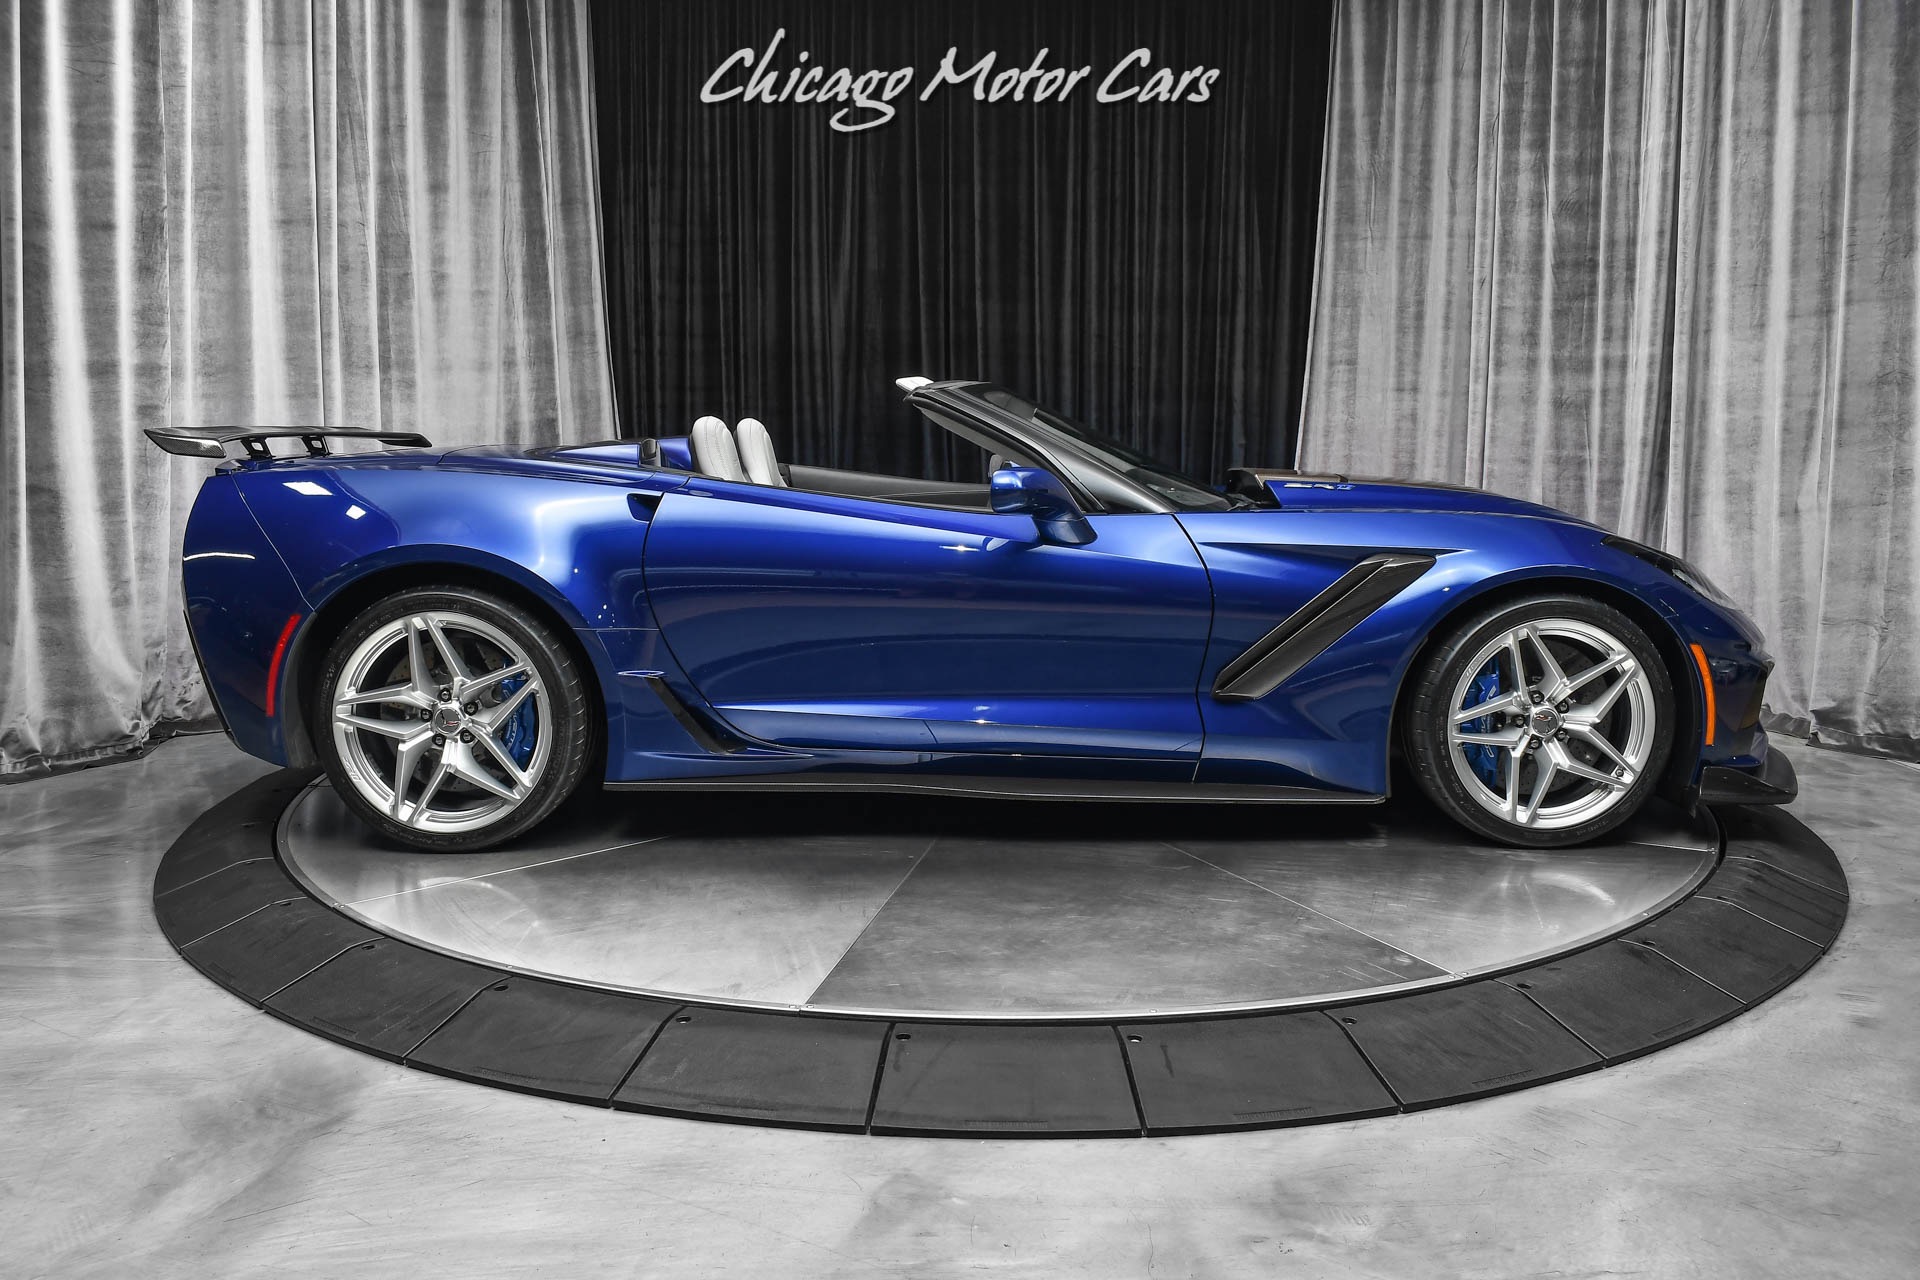 Used-2019-Chevrolet-Corvette-ZR1-3ZR-Convertible-Extremely-Rare-Color-Admiral-Blue-Metallic